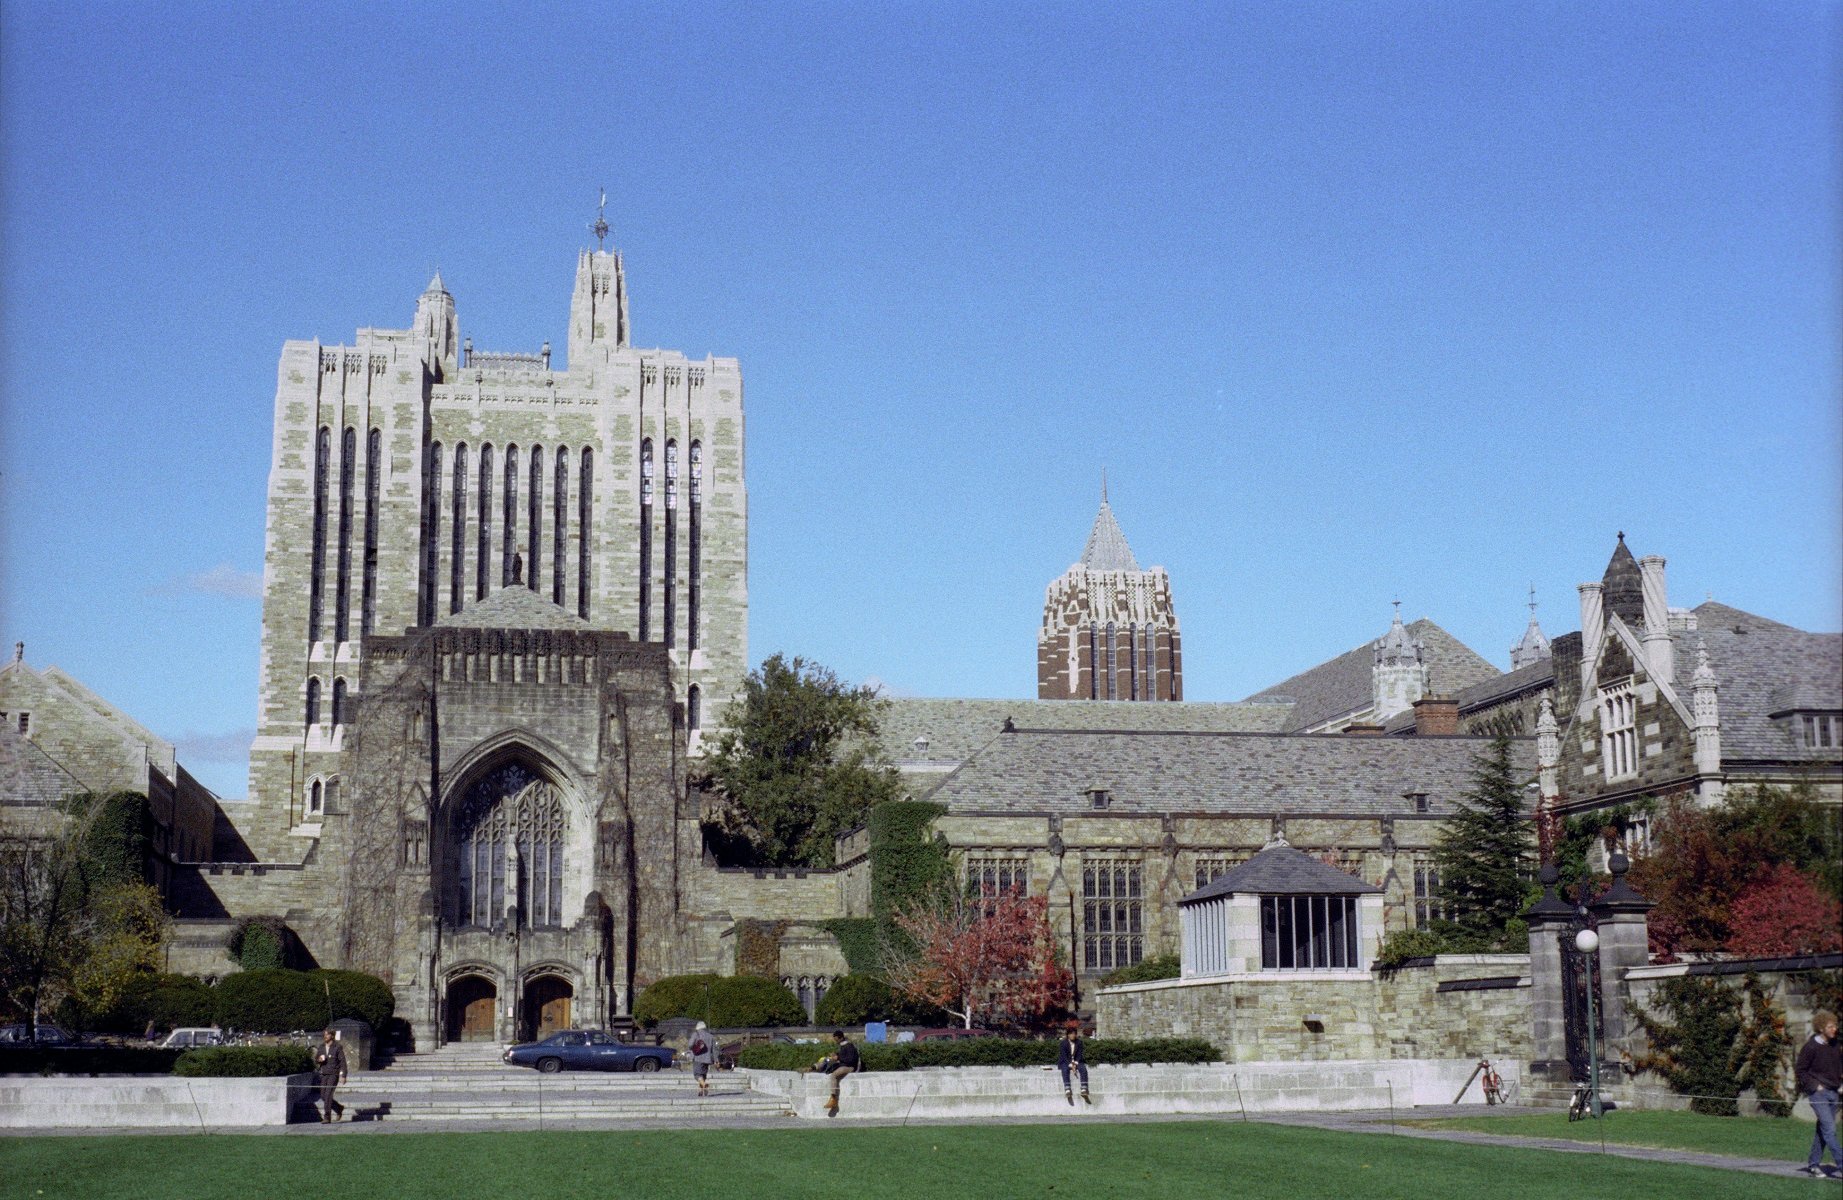 Yale University in New Haven, Connecticut on October 18, 1981